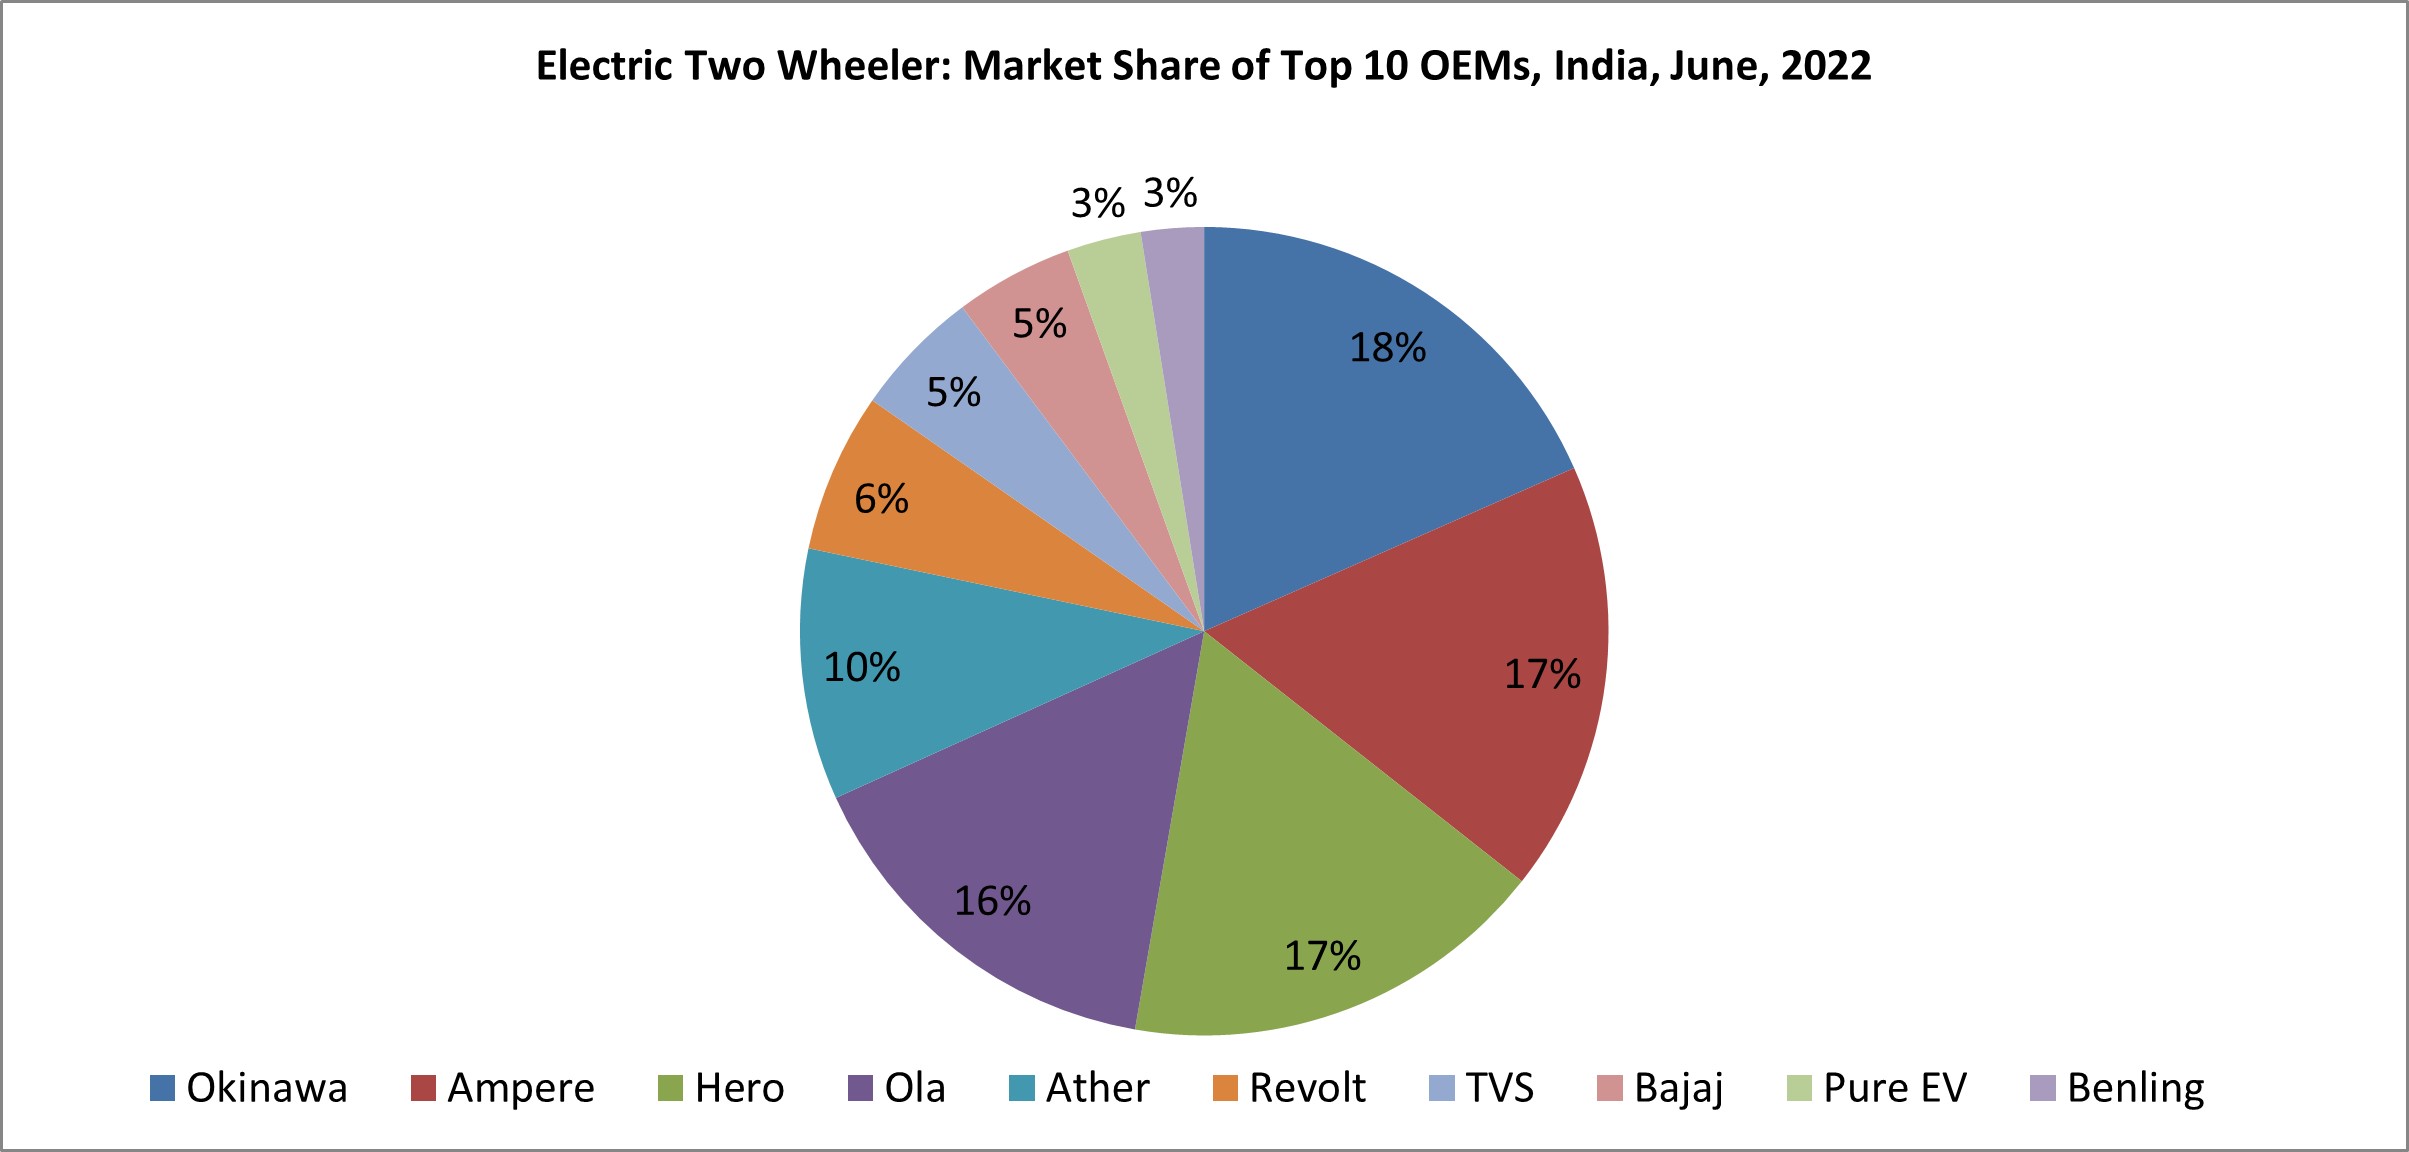 Electric Two Wheeler: Market Share of Top 10 OEMs, India, June, 2022